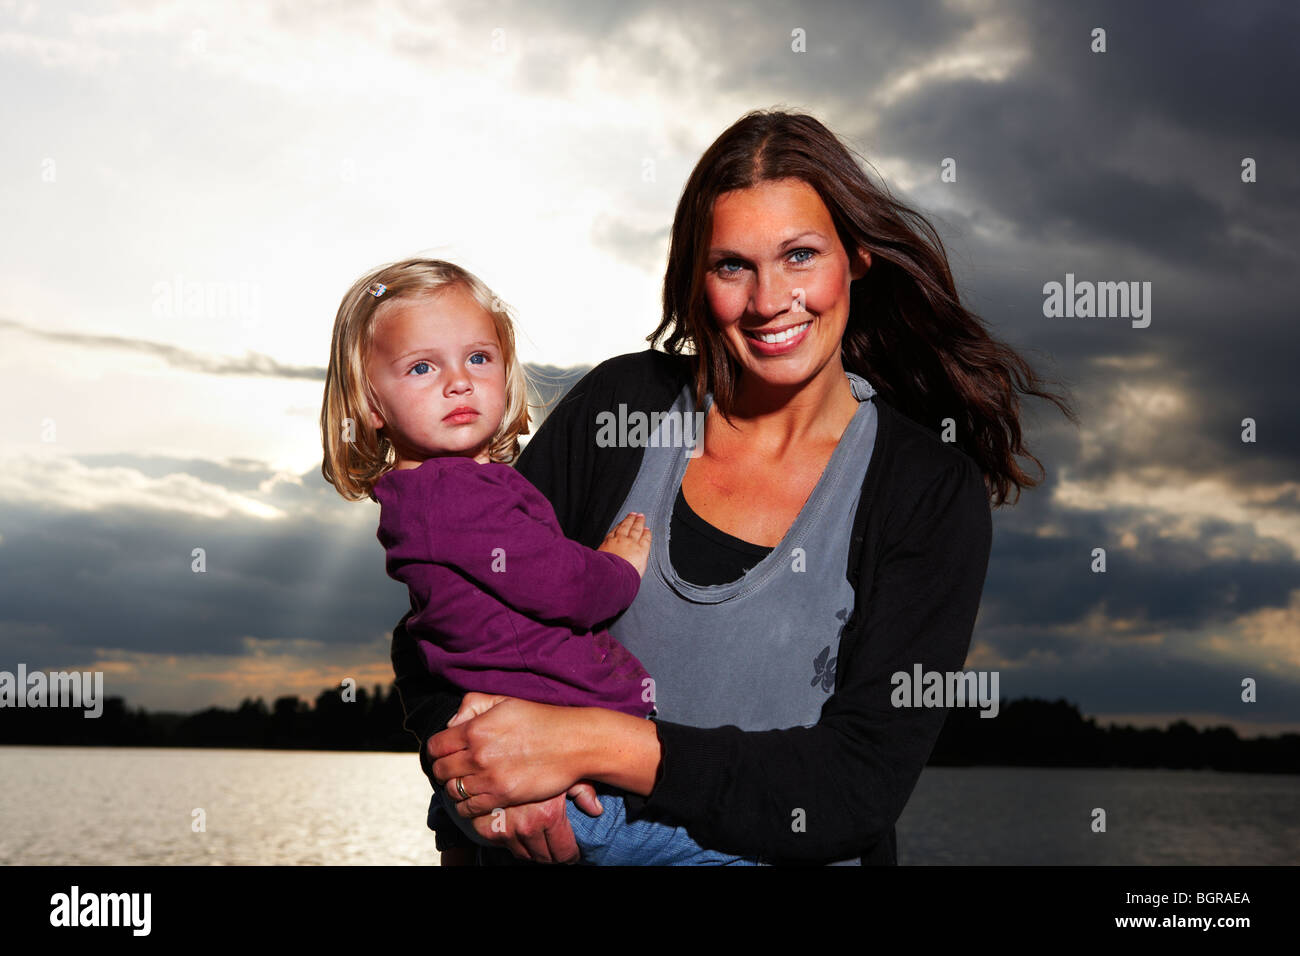 Mother and daughter by the sea. Stock Photo